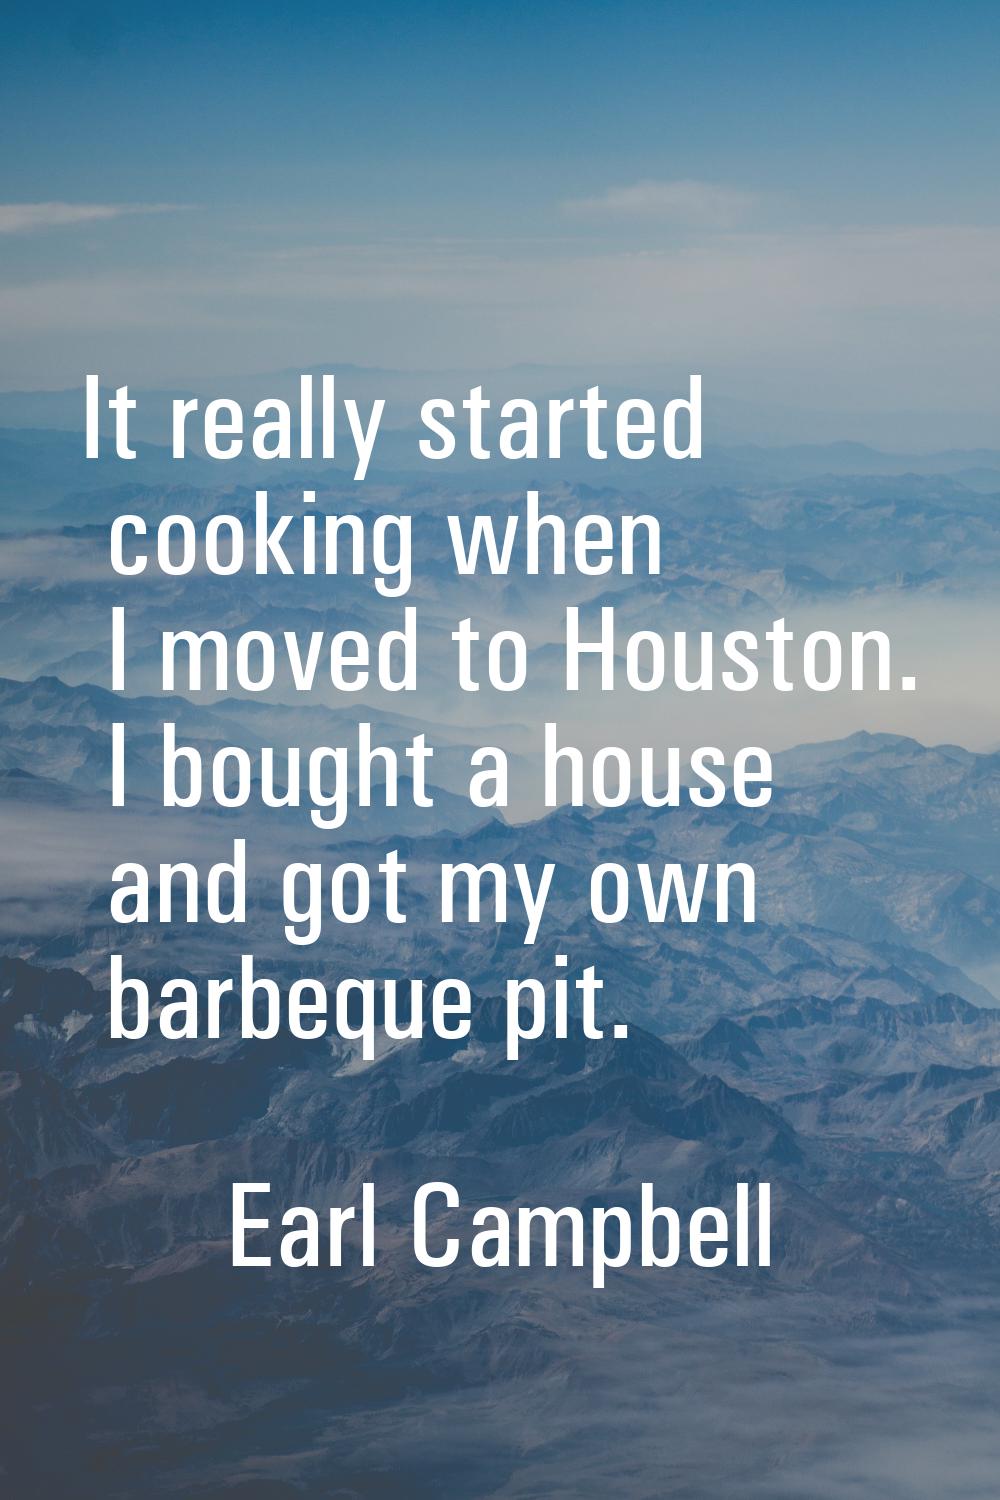 It really started cooking when I moved to Houston. I bought a house and got my own barbeque pit.